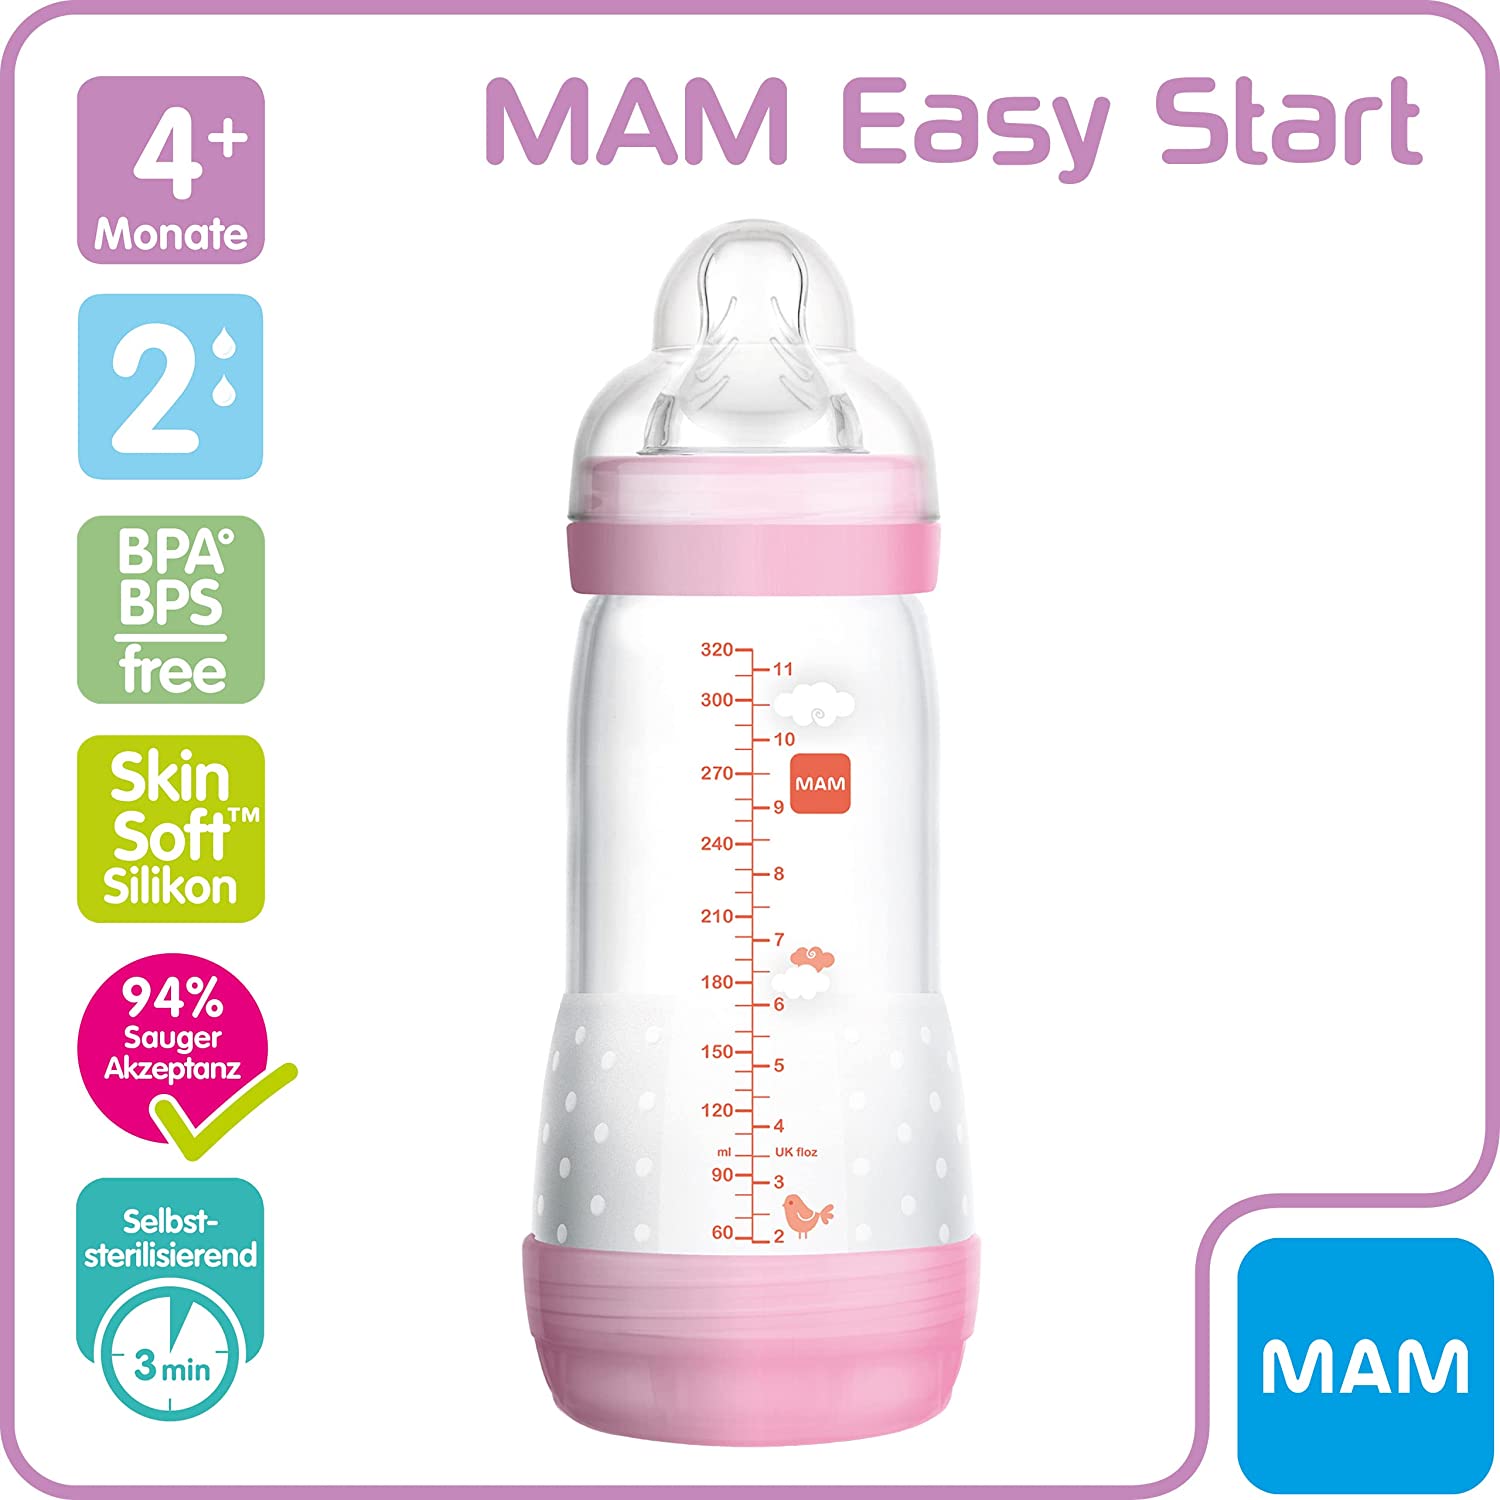 MAM Easy Start anti-colic baby bottle (320 ml), milk bottle with innovative base valve to prevent colic, baby’s drinking bottle with size 2 teat, 4+ months, tiger